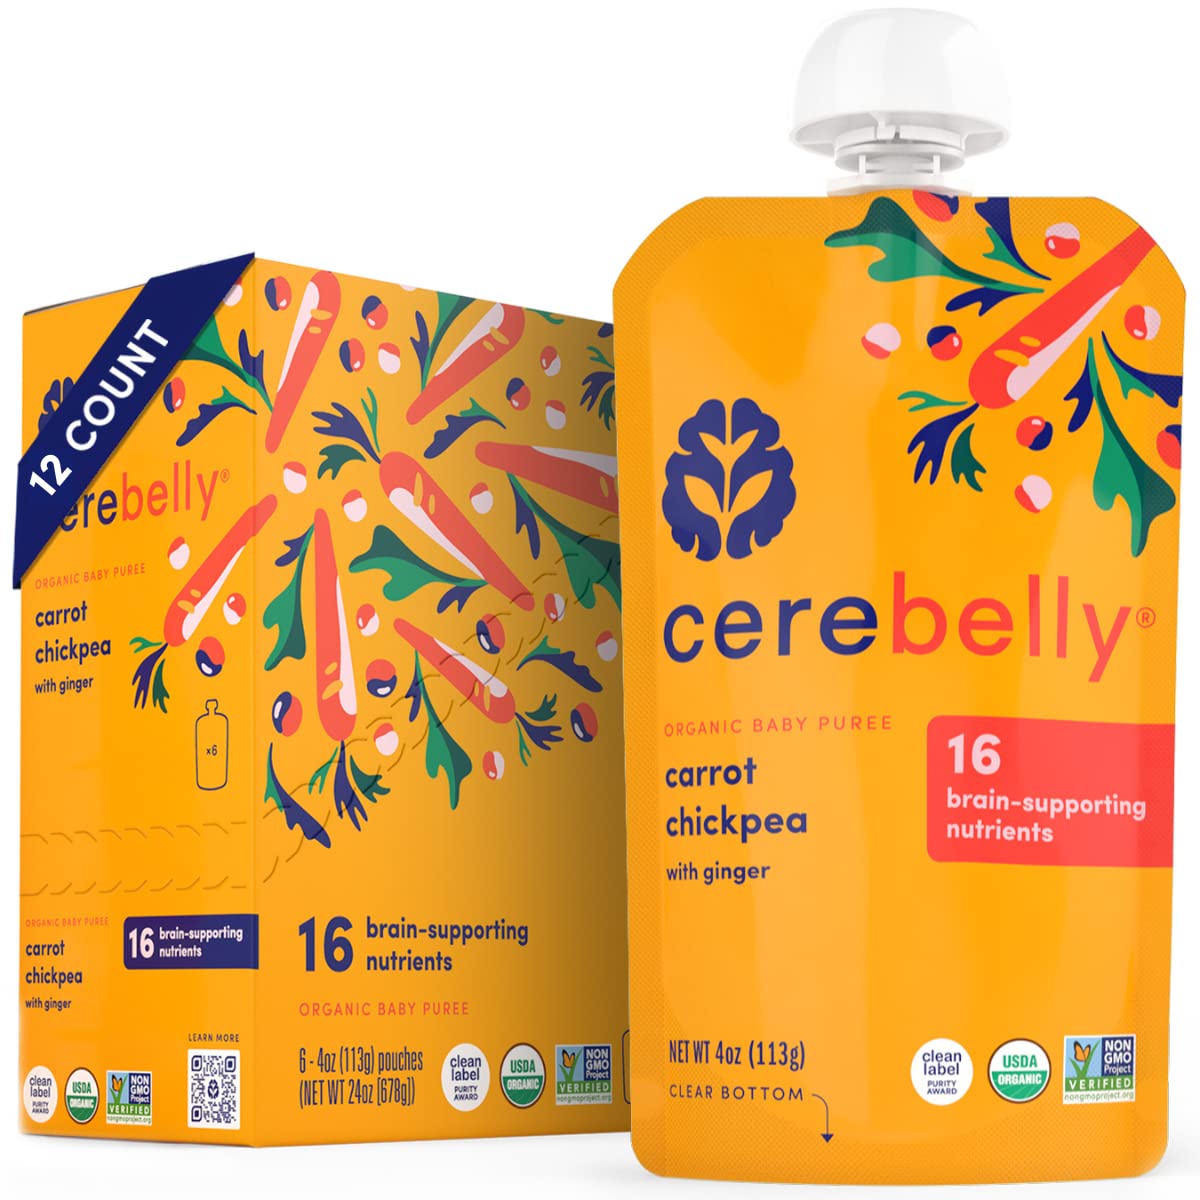 Cerebelly Baby Food Pouches – Organic Carrot Chickpea with Ginger (4 oz, Pack of 12) - Toddler Snacks, 16 Brain-supporting Nutrients, Healthy Snacks, Made with Gluten-Free Ingredients, No Added Sugar